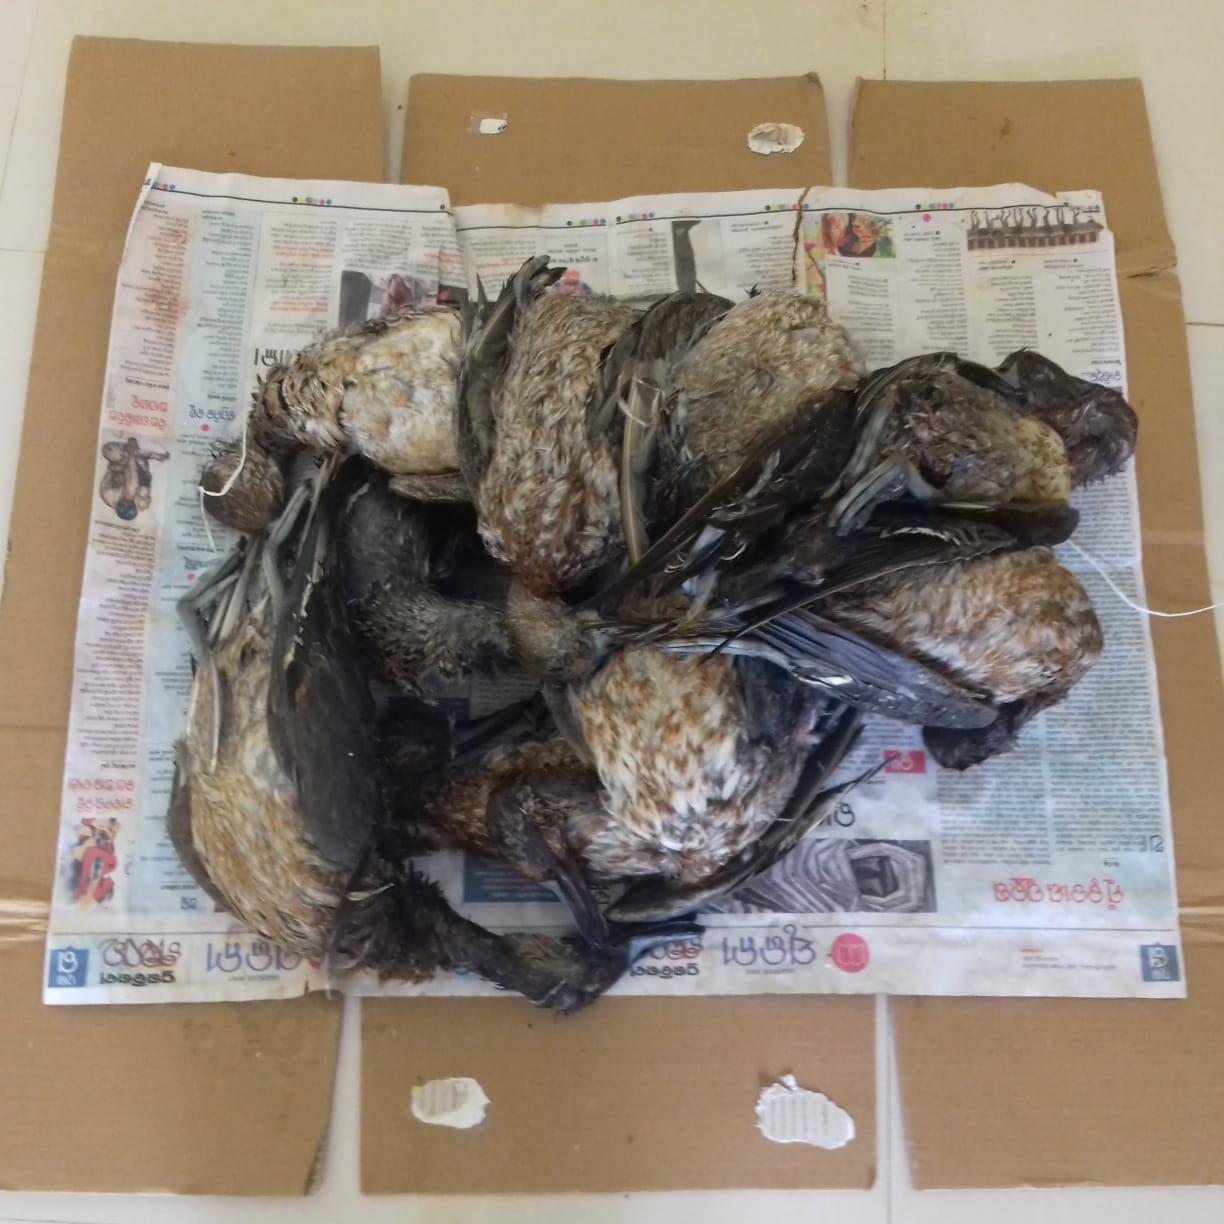 Poacher Arrested With 11 Bird Carcasses In Chilika